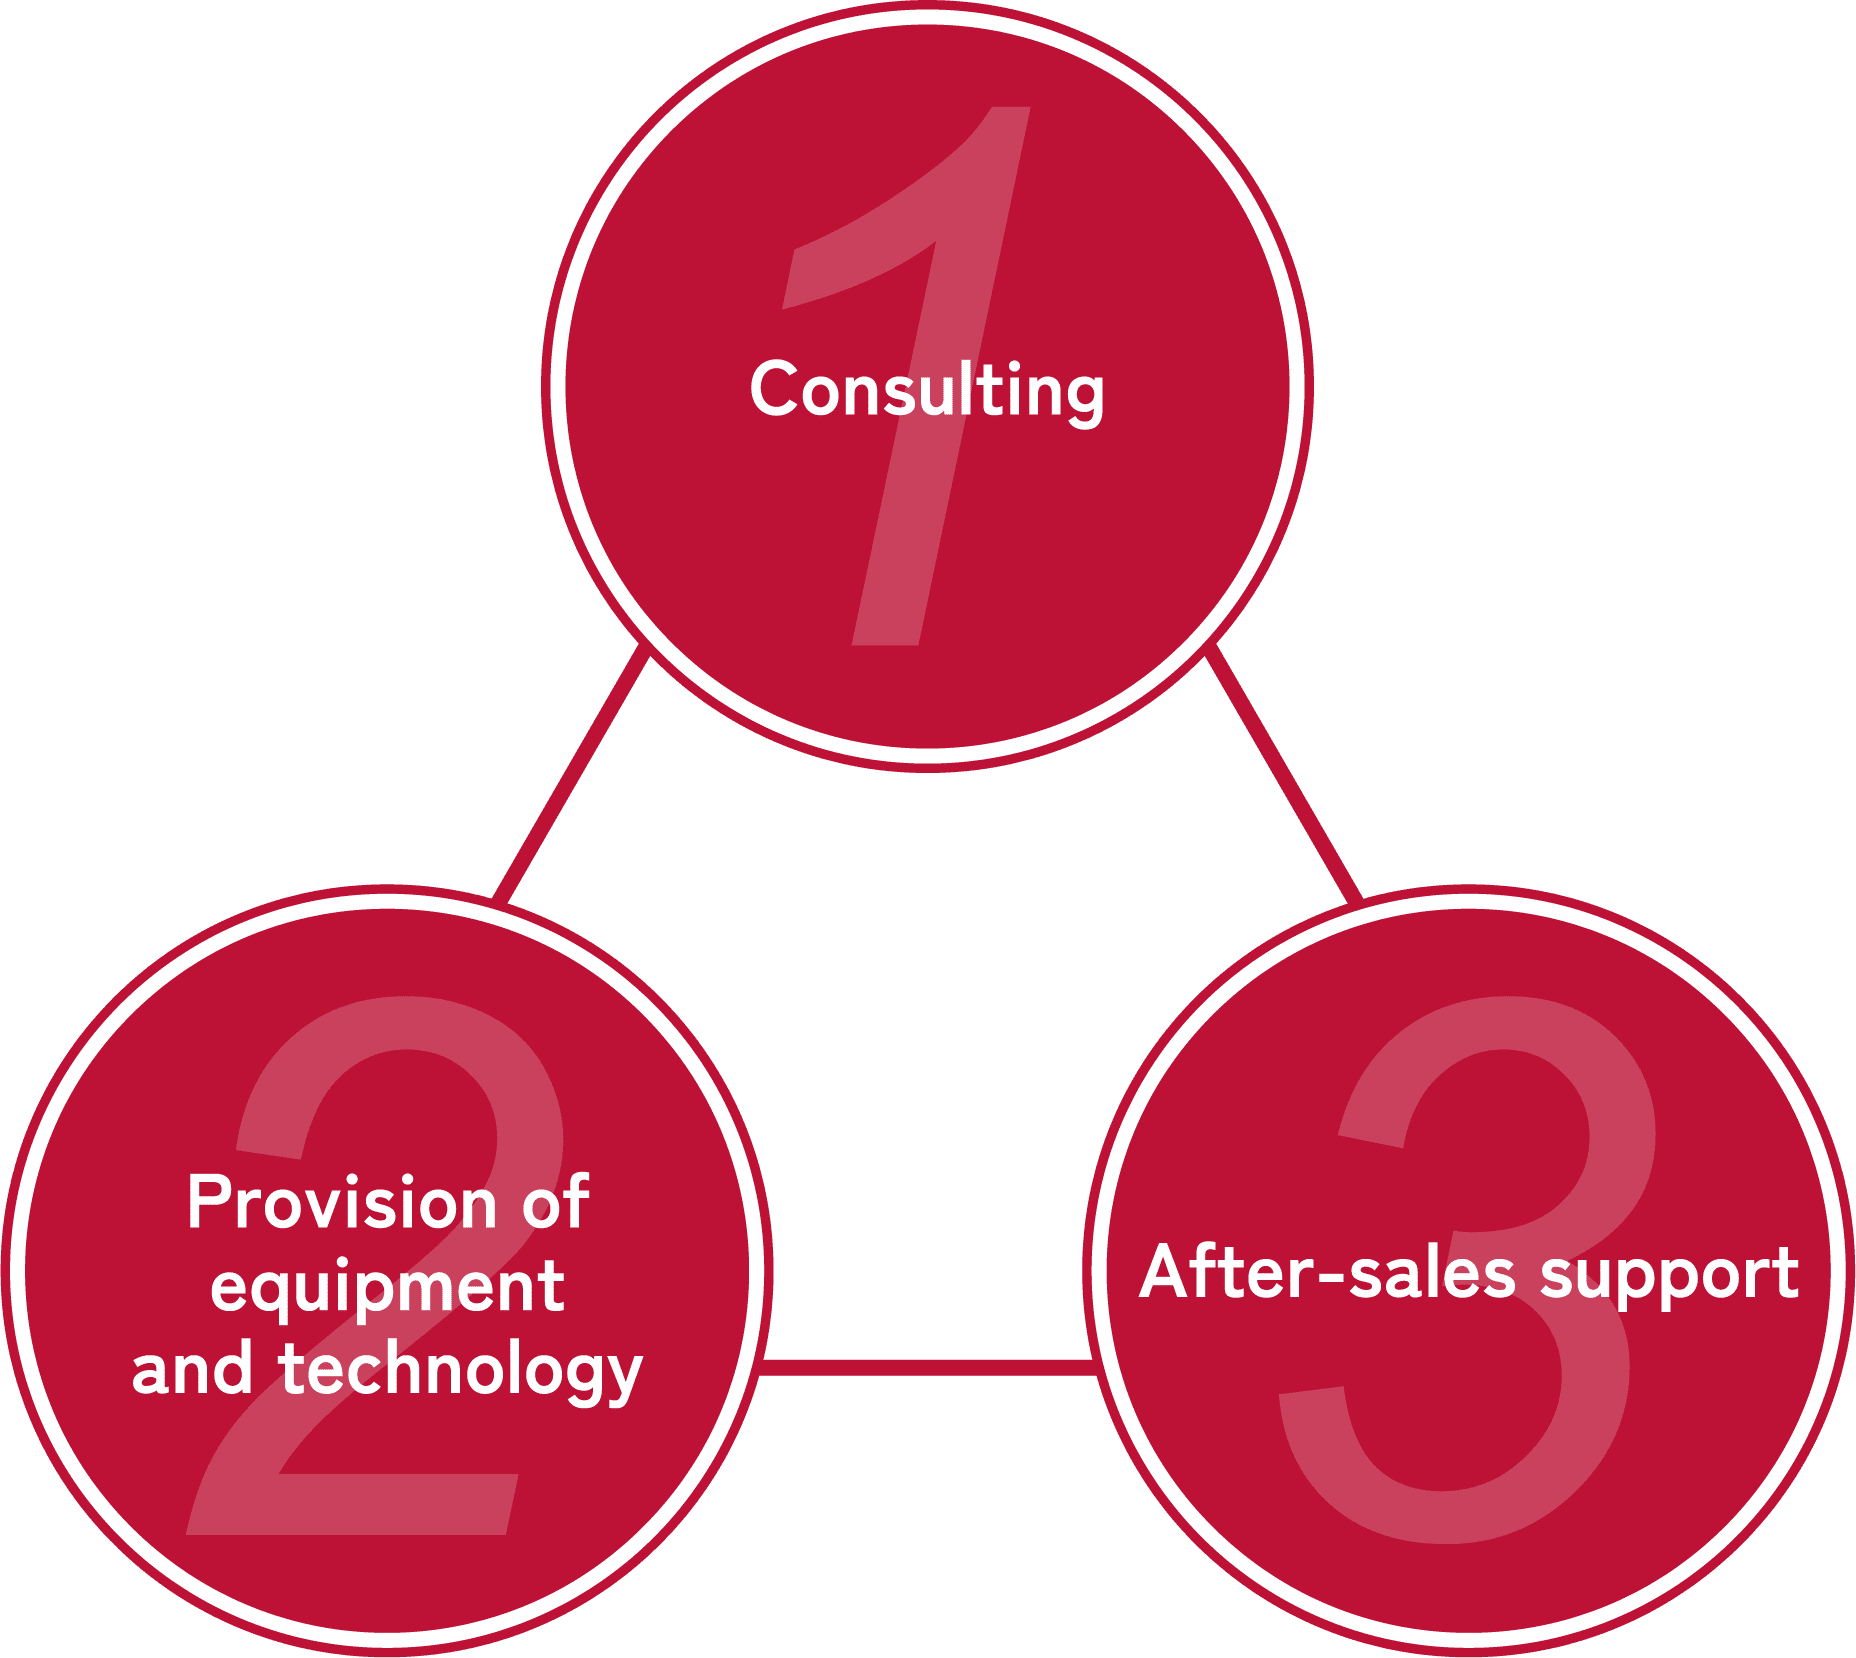 Consulting, Provision of equipment and technology, After-sales support